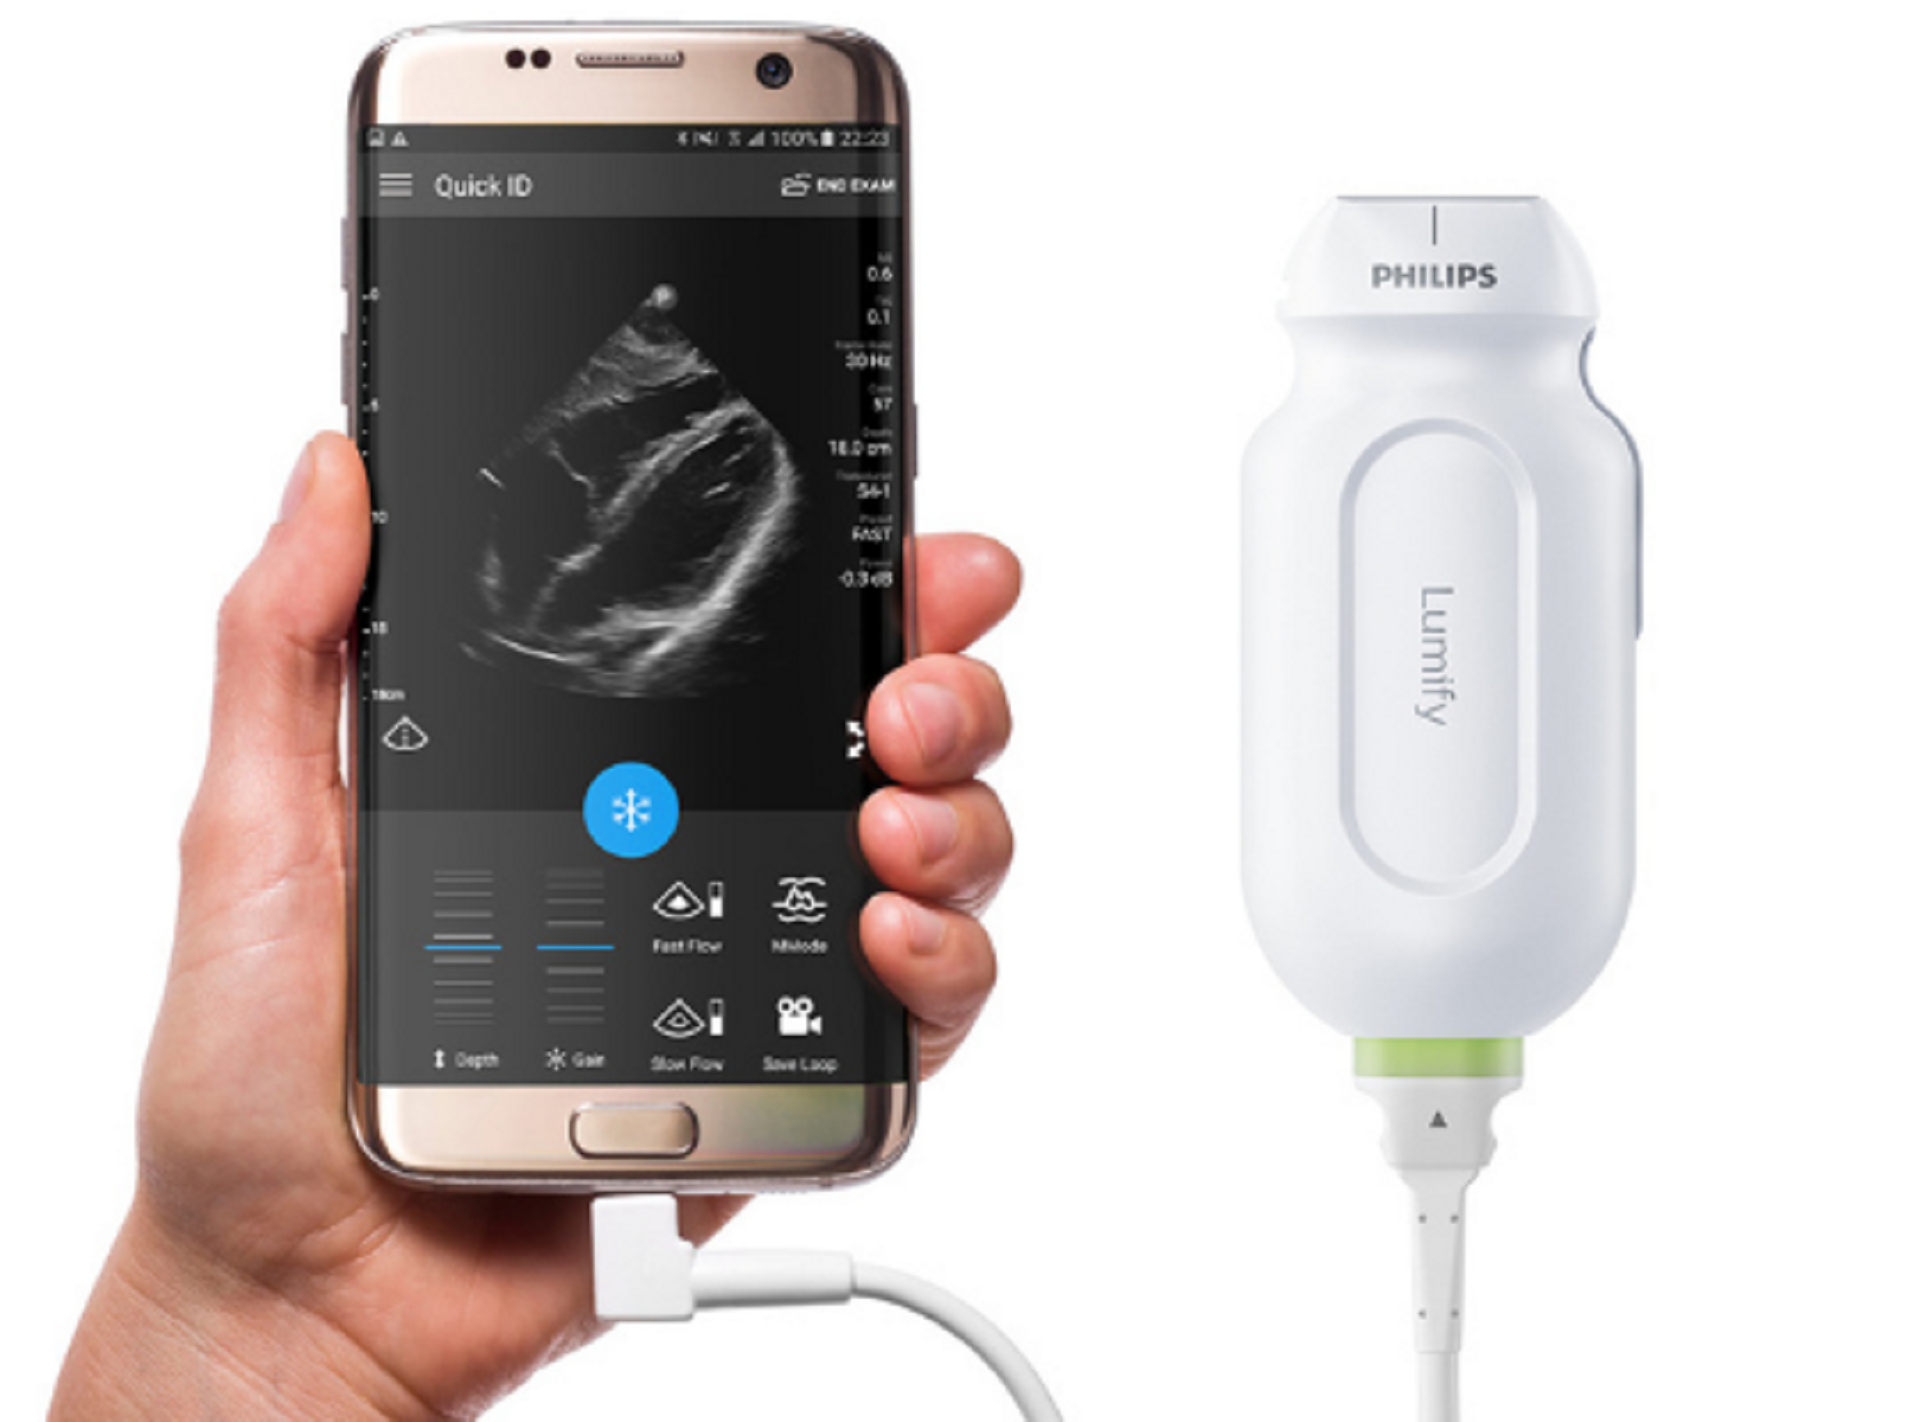 Philips Expands Imaging Capabilities on Handheld Ultrasound Device